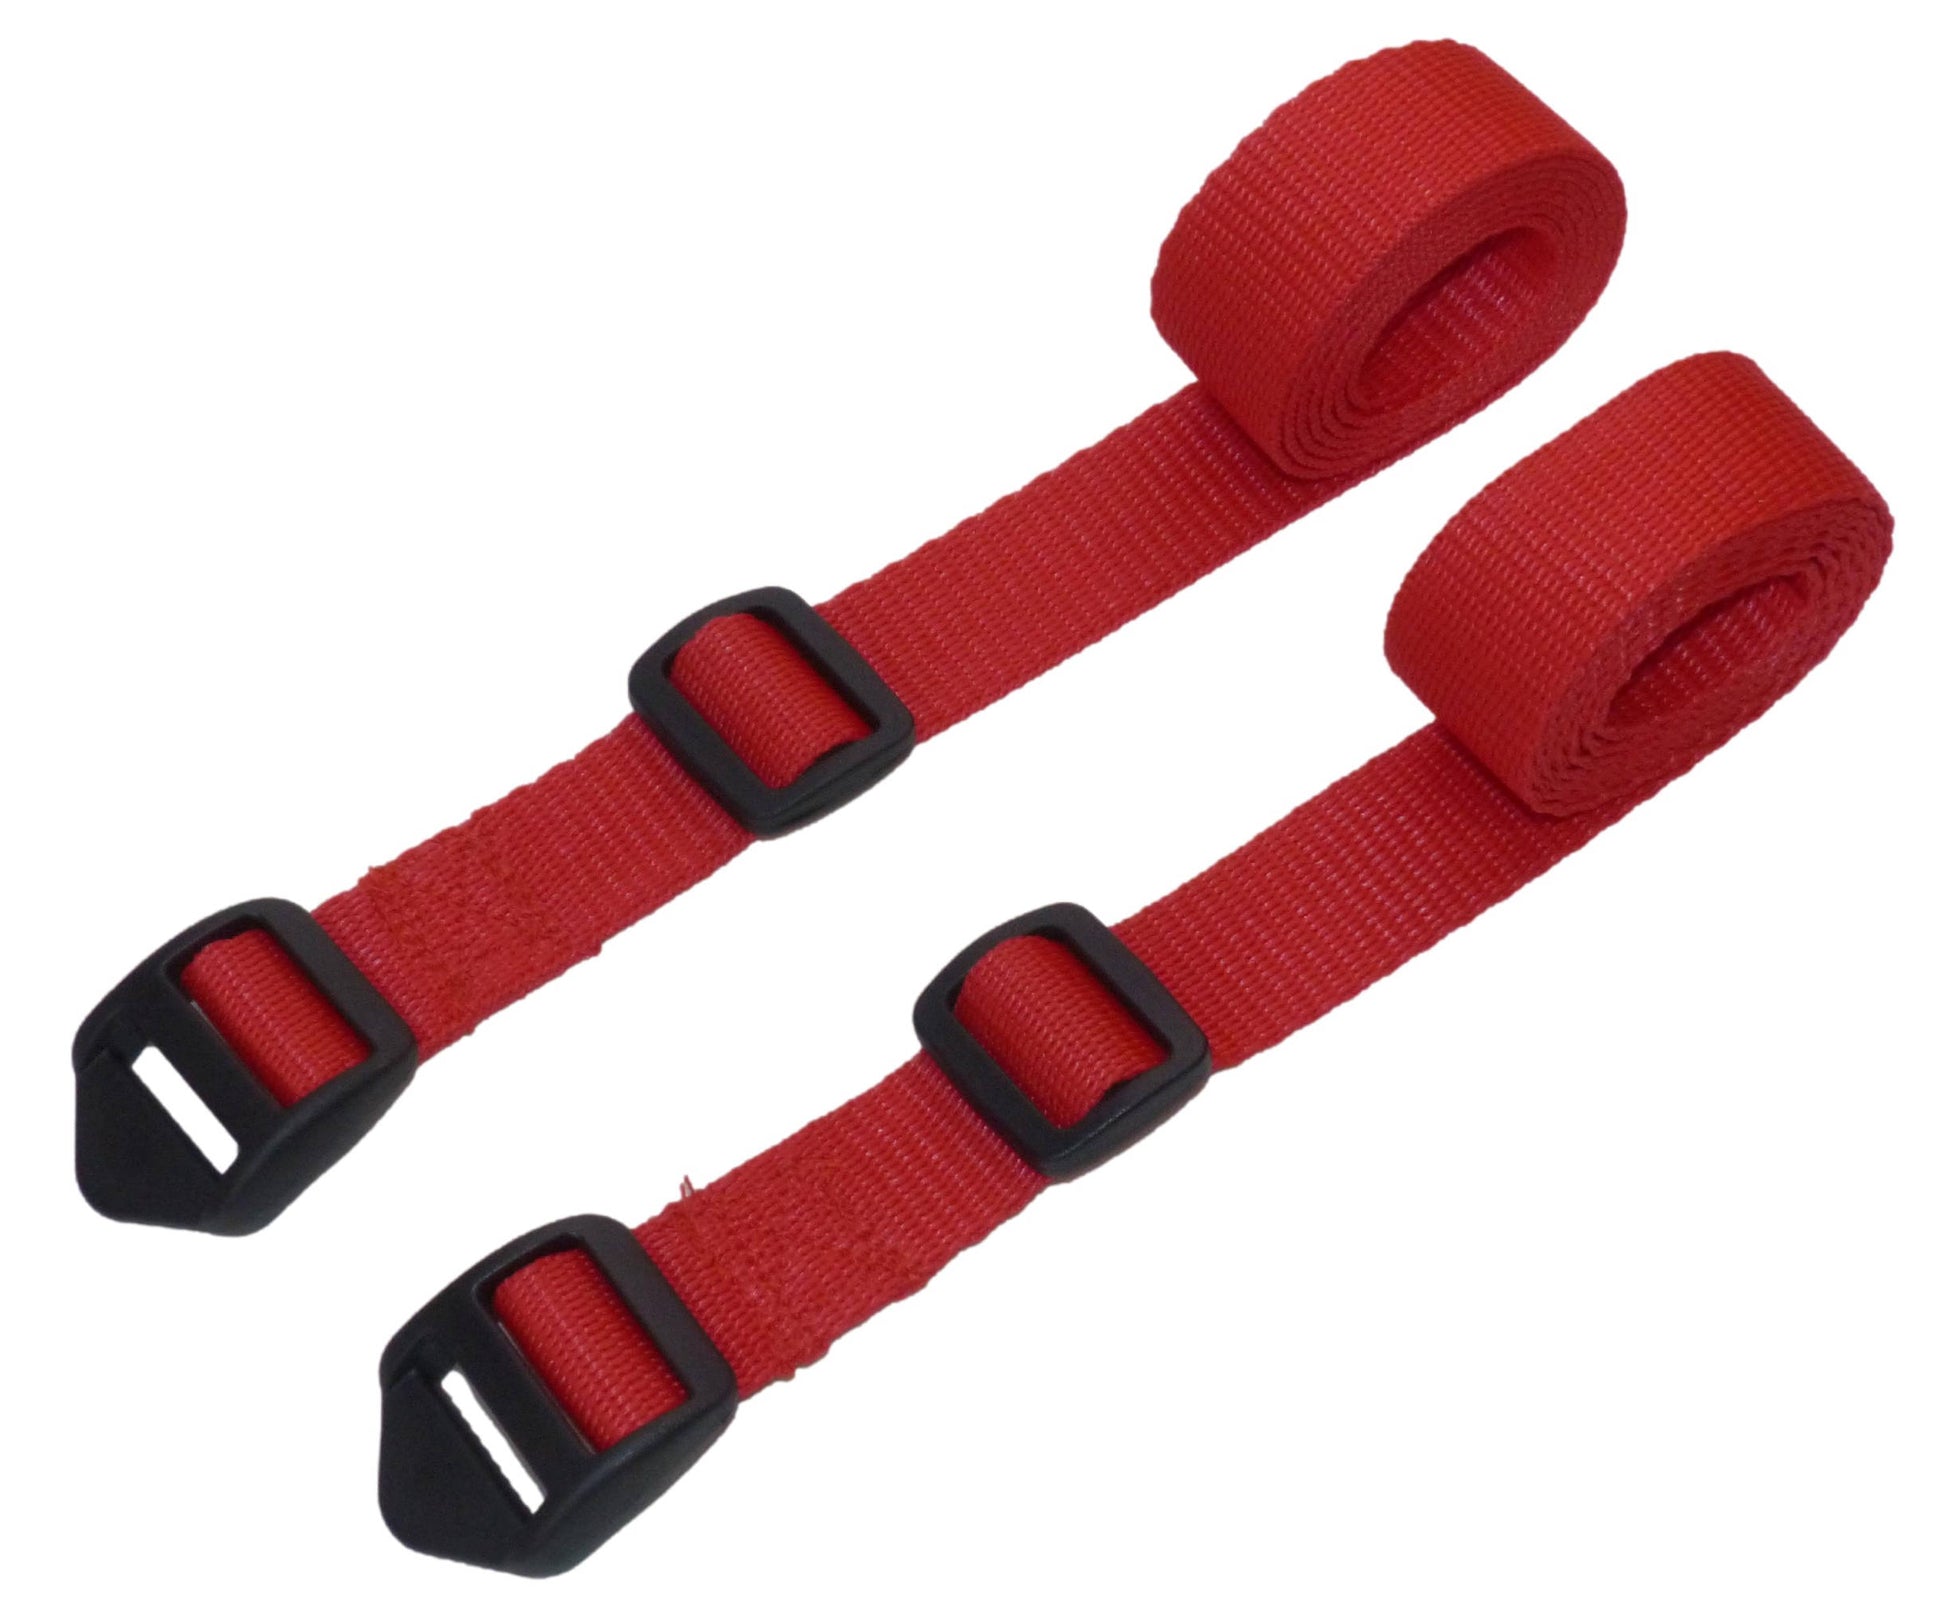 Benristraps 25mm Webbing Strap with Ladderloc Buckle (Pair) in red